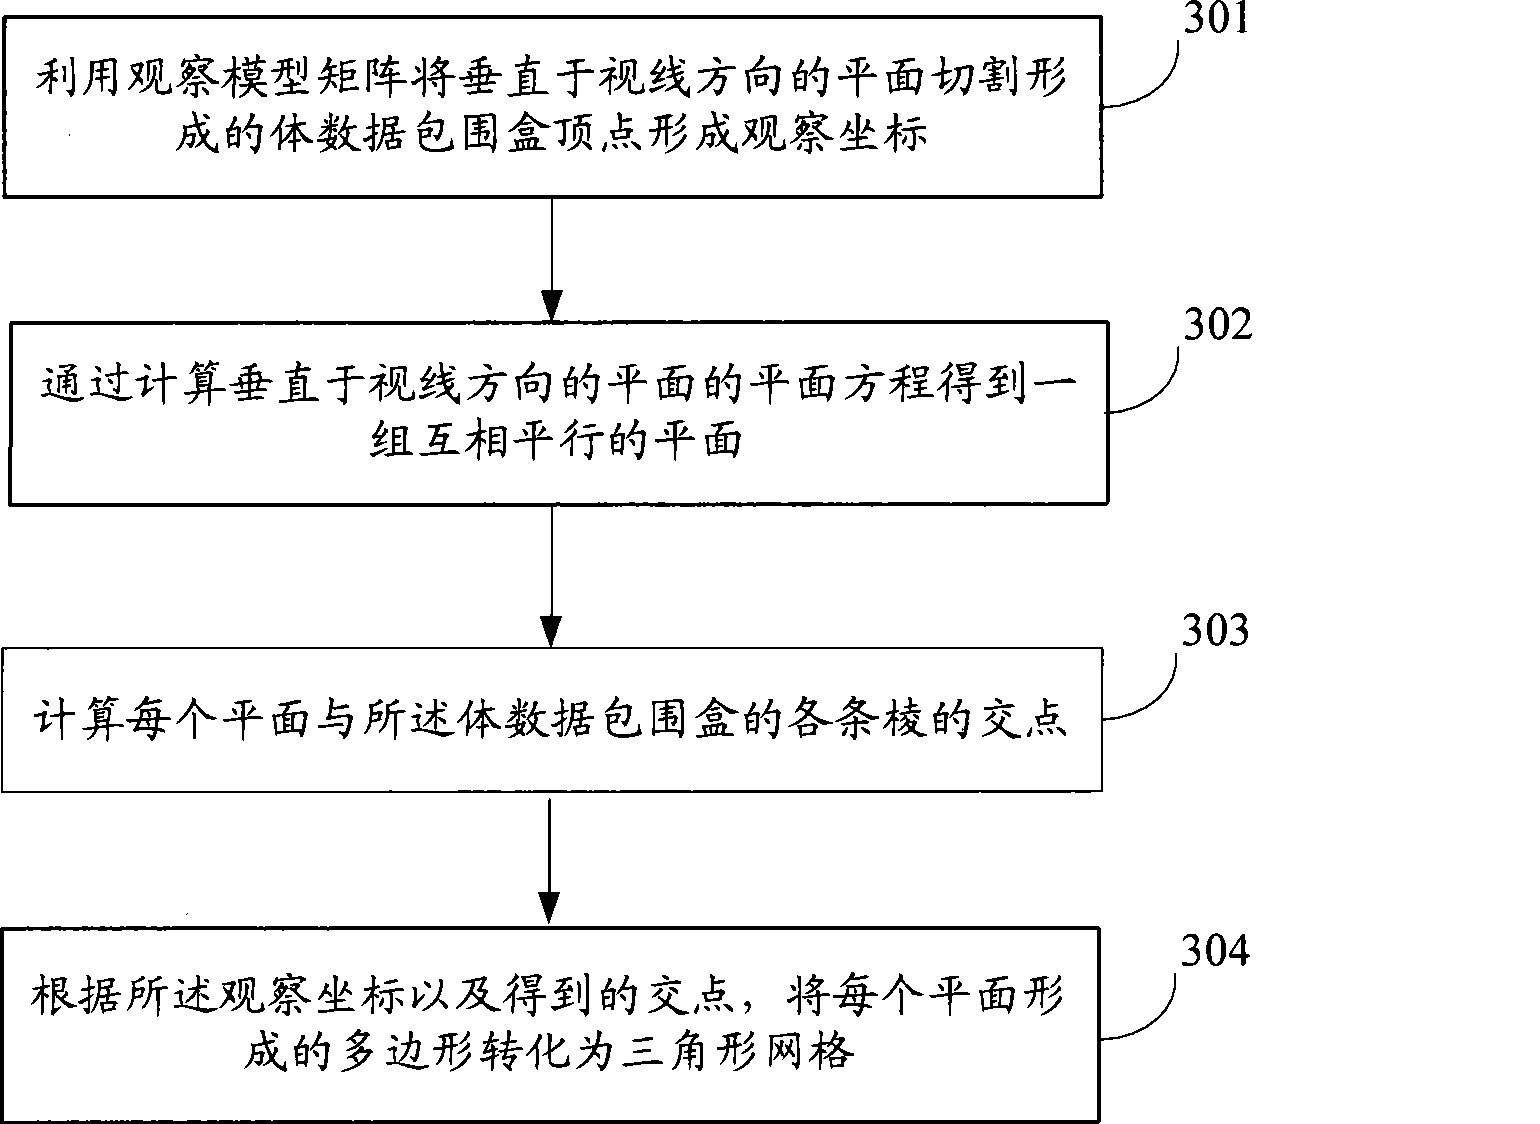 Method and apparatus for drafting medical image body